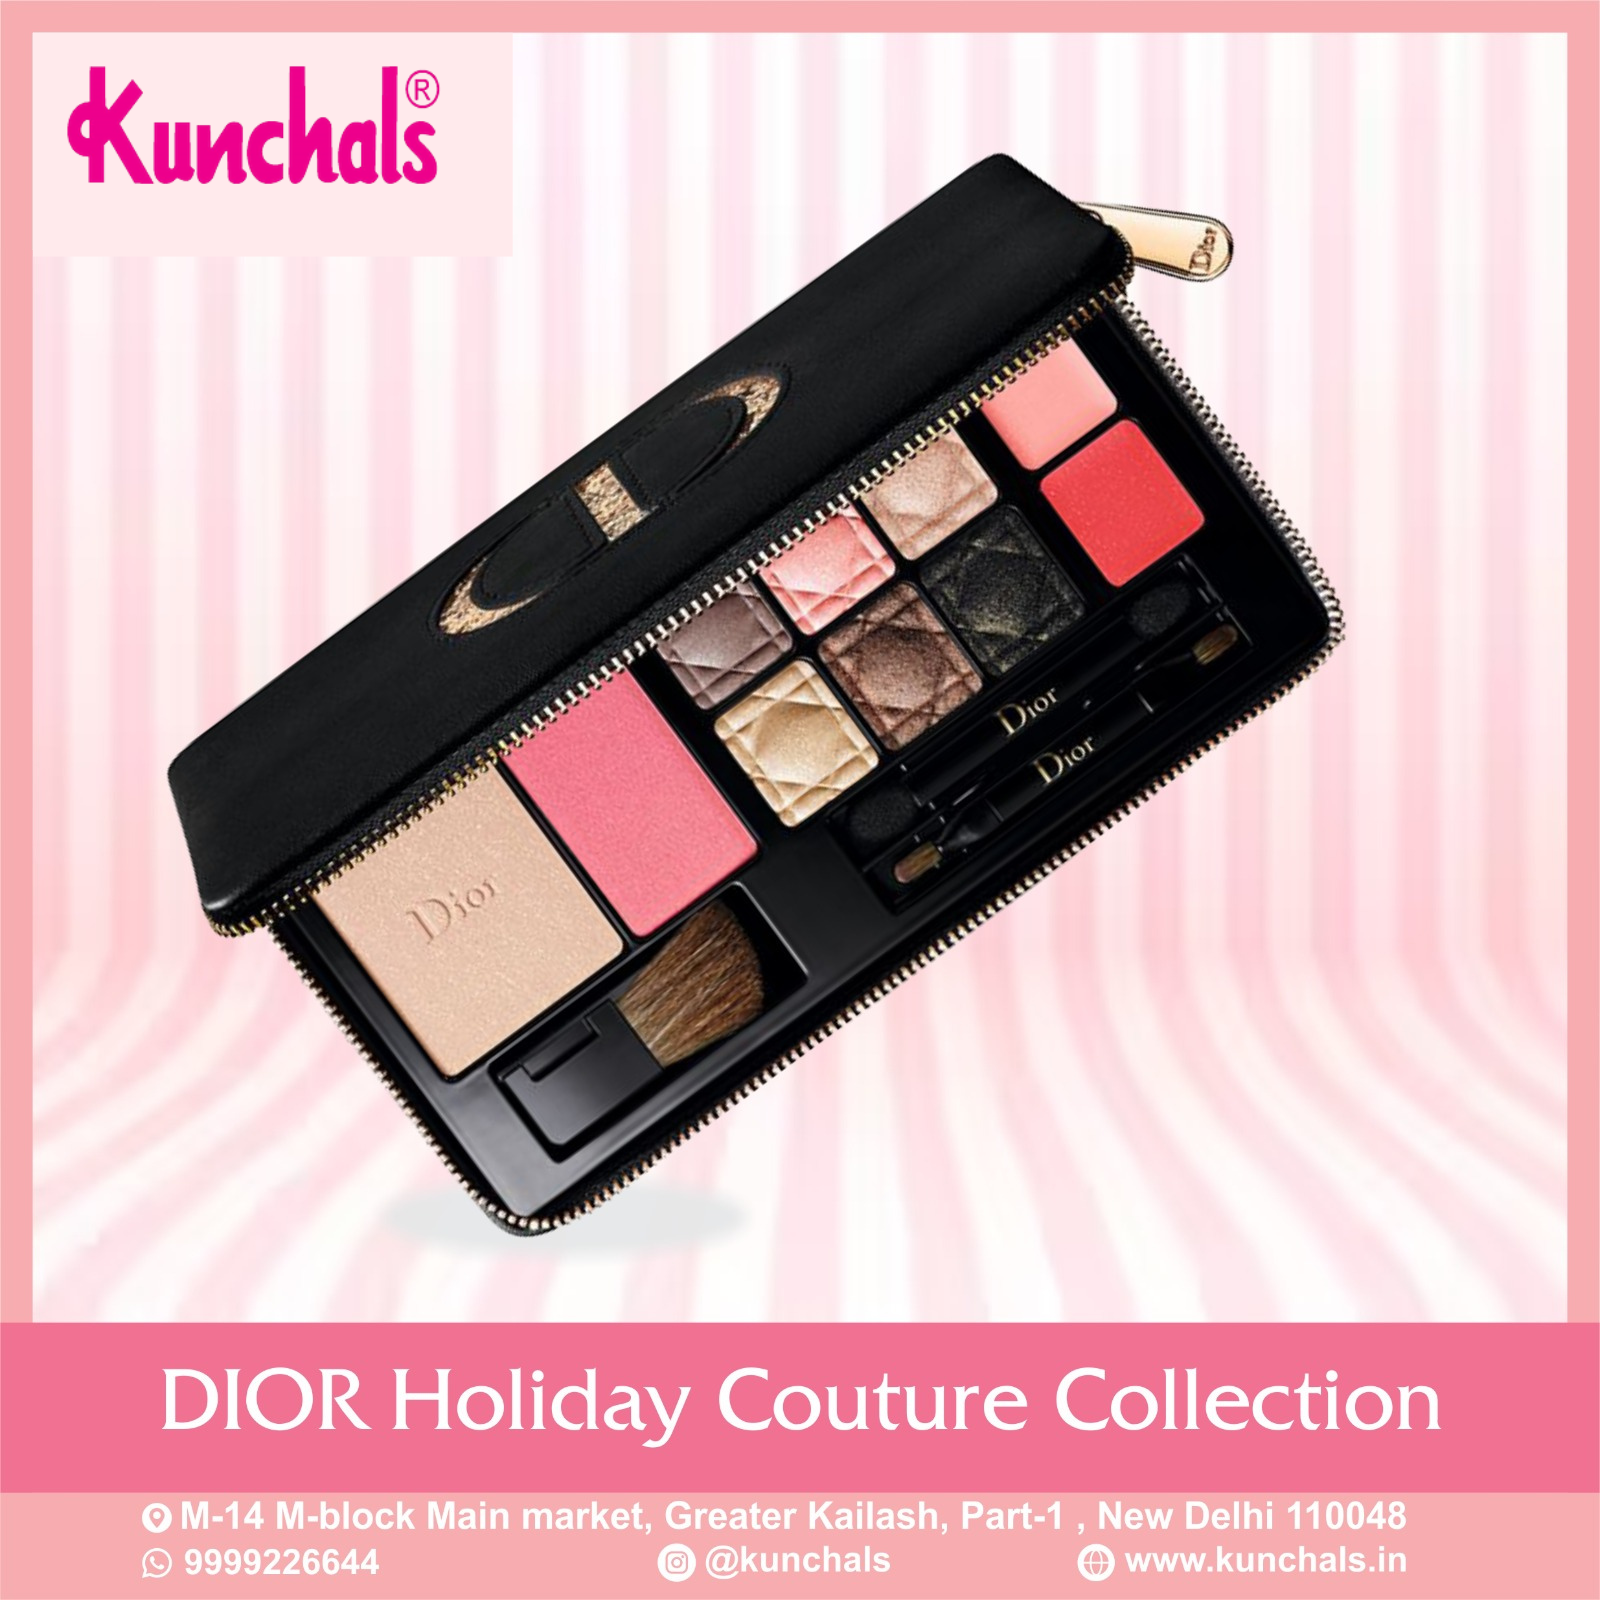 Dior Holiday Couture Collection – Kunchals